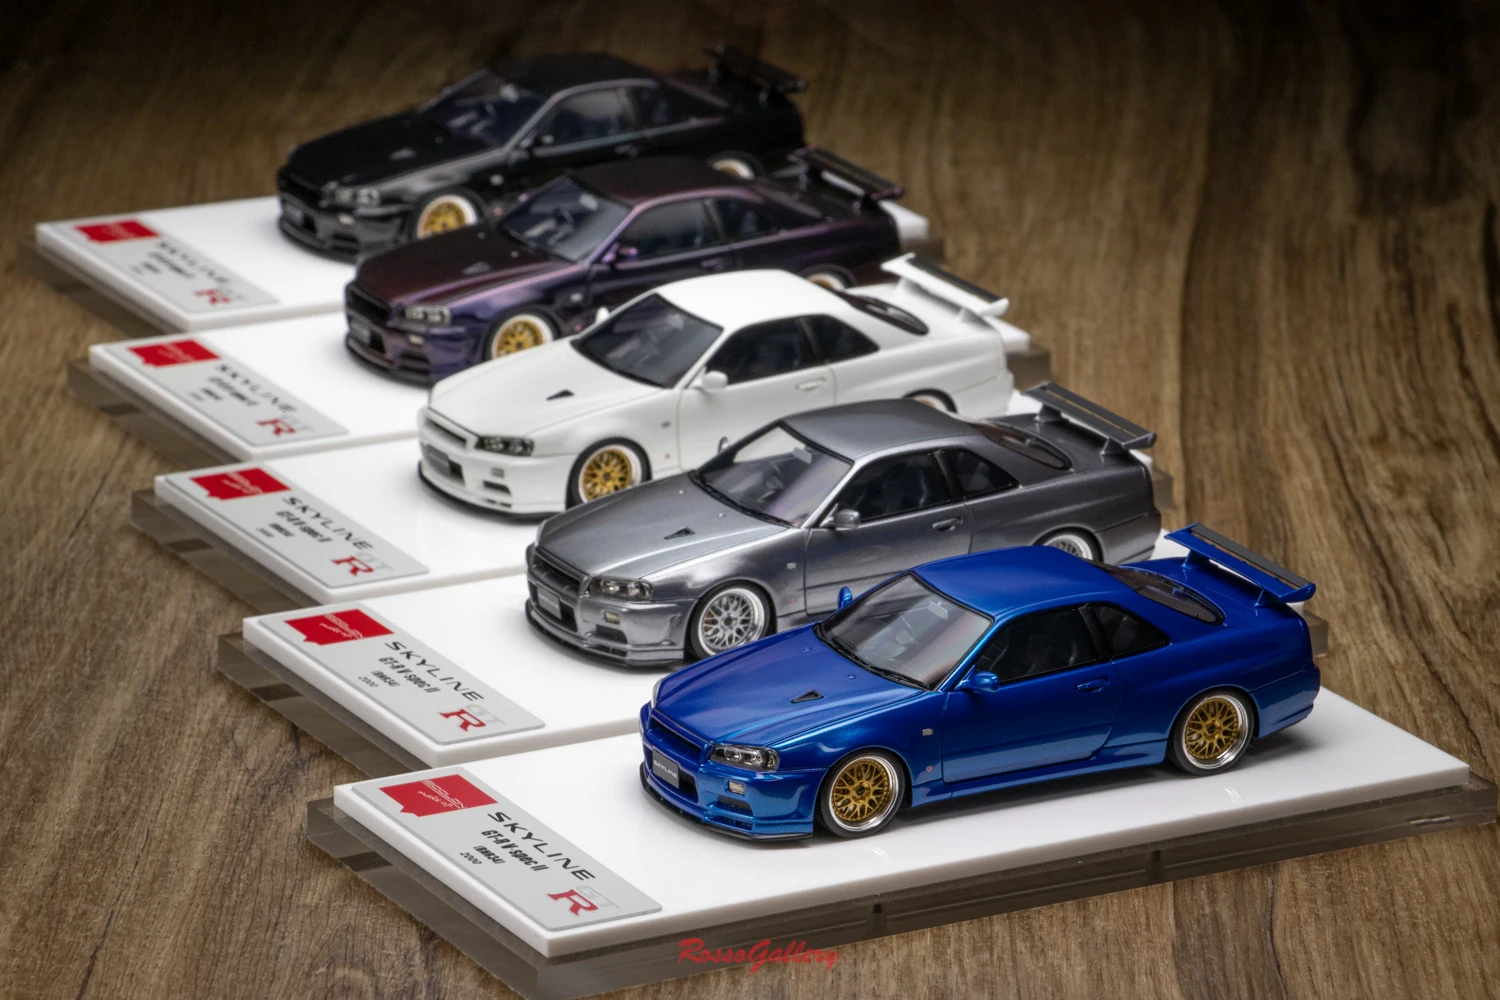 

MAKE UP 1:43 For Nissan GTR R34 V-spec II BBS 2000 JDM Simulated Limited Edition Resin Alloy Static Car Model Toy Gift